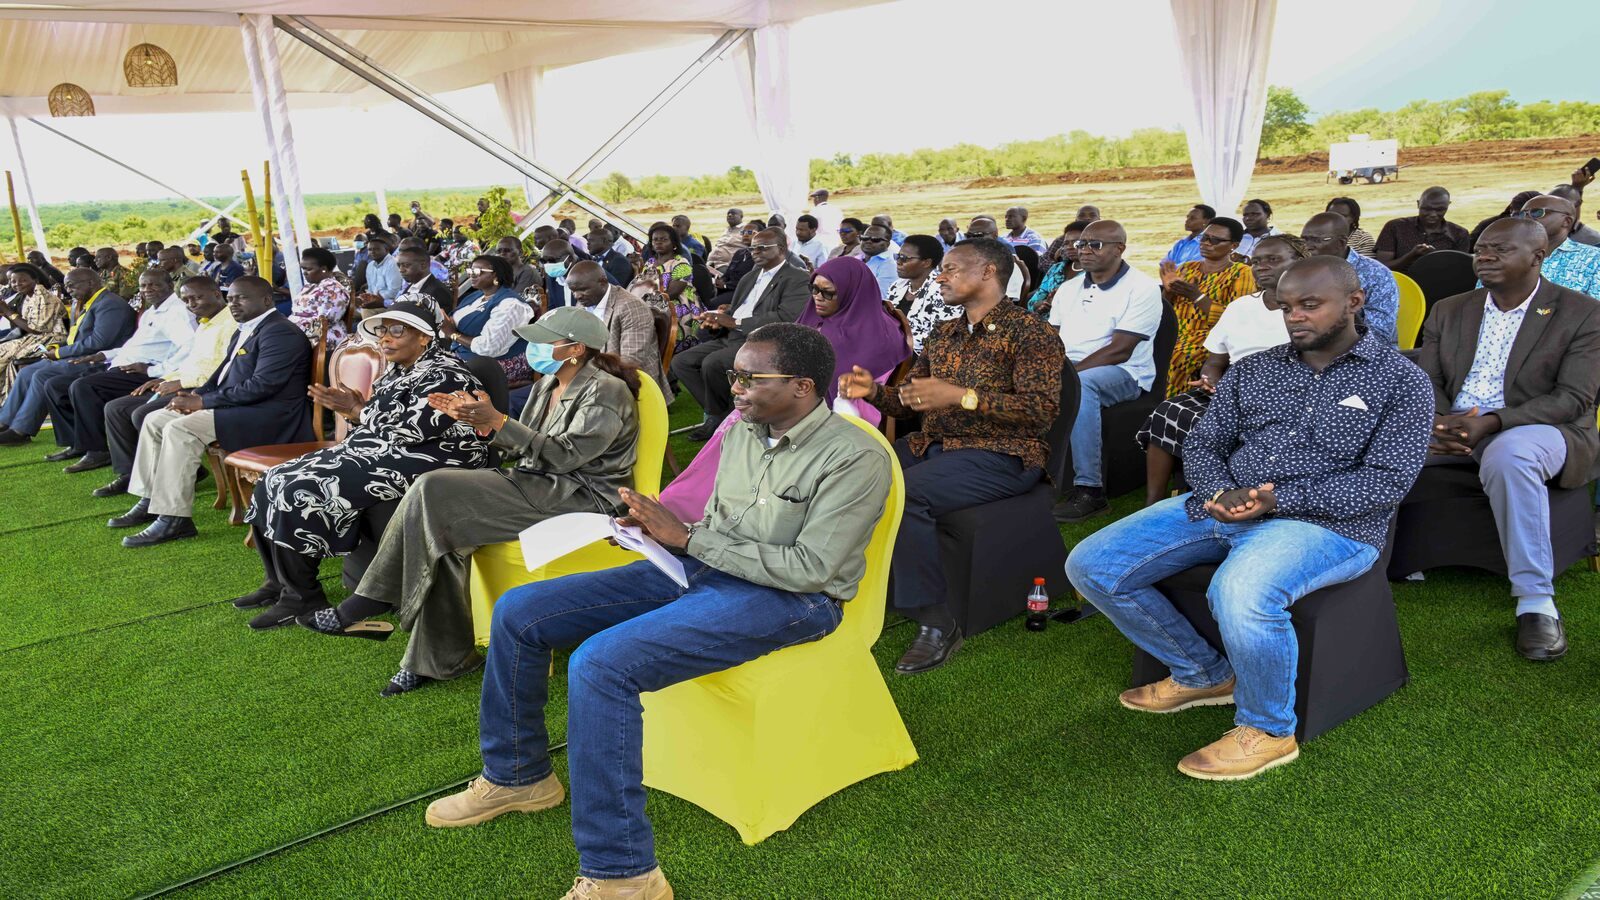 Some of the guests that attending the occasion of the President Yoweri Kaguta Museveni’s visit to assess the status of implementation of Atiak Sugar Project in Amuru district on the 13th April 2024. Photo by PPU/Tony Rujuta.